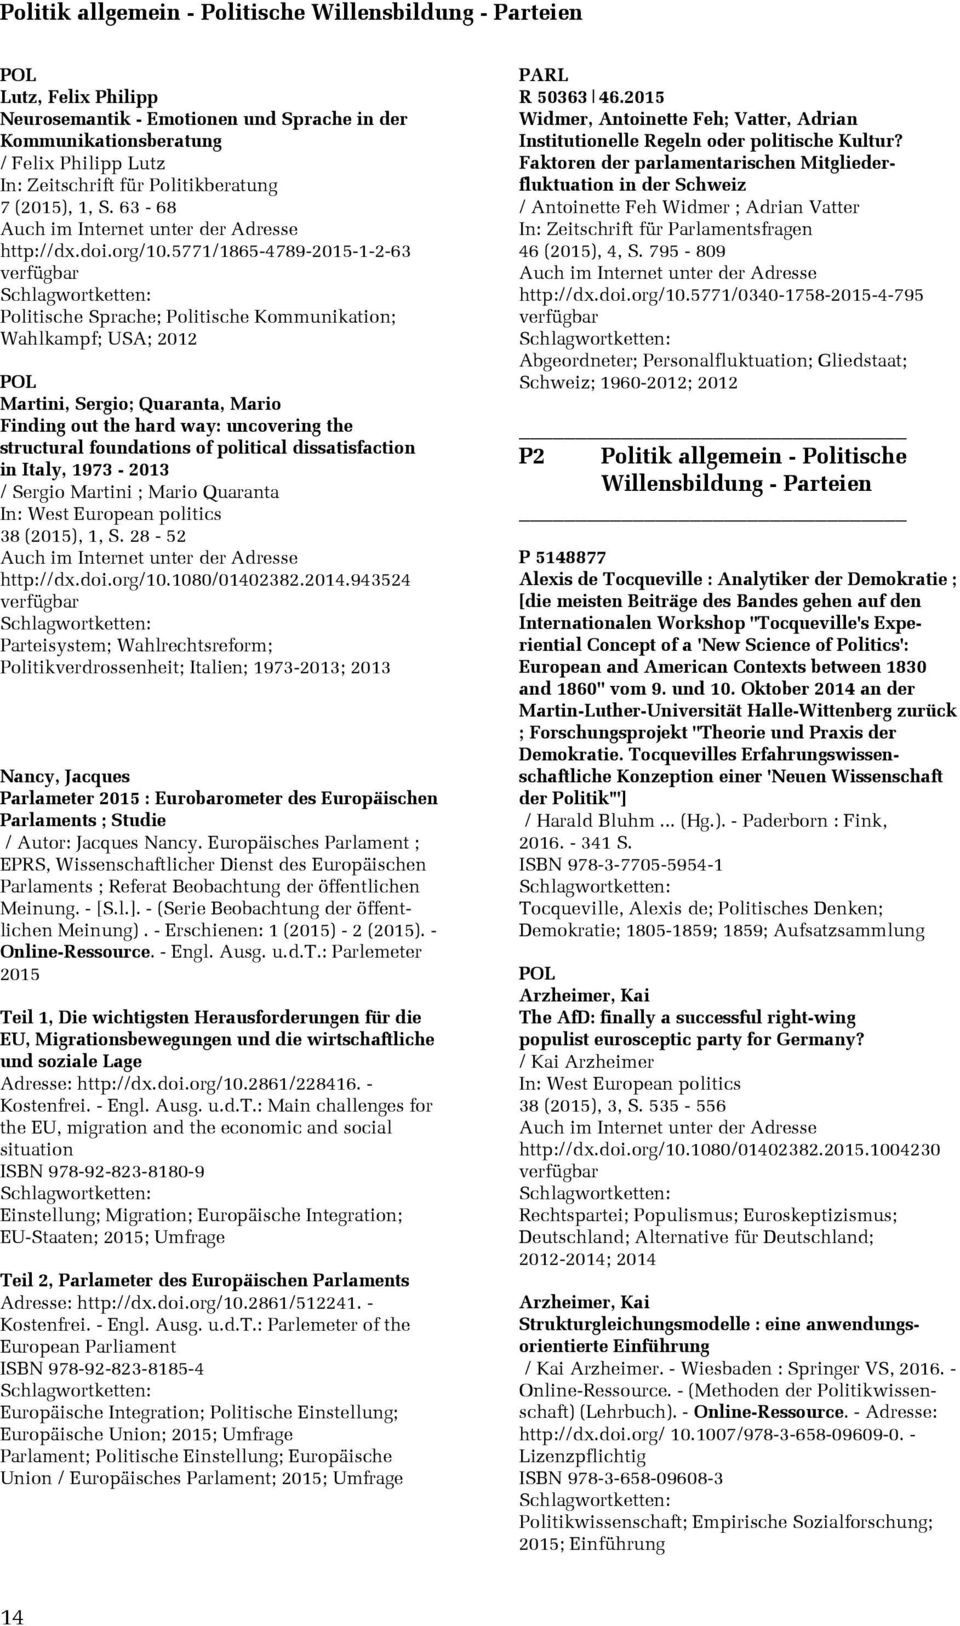 5771/1865-4789-2015-1-2-63 Politische Sprache; Politische Kommunikation; Wahlkampf; USA; 2012 Martini, Sergio; Quaranta, Mario Finding out the hard way: uncovering the structural foundations of